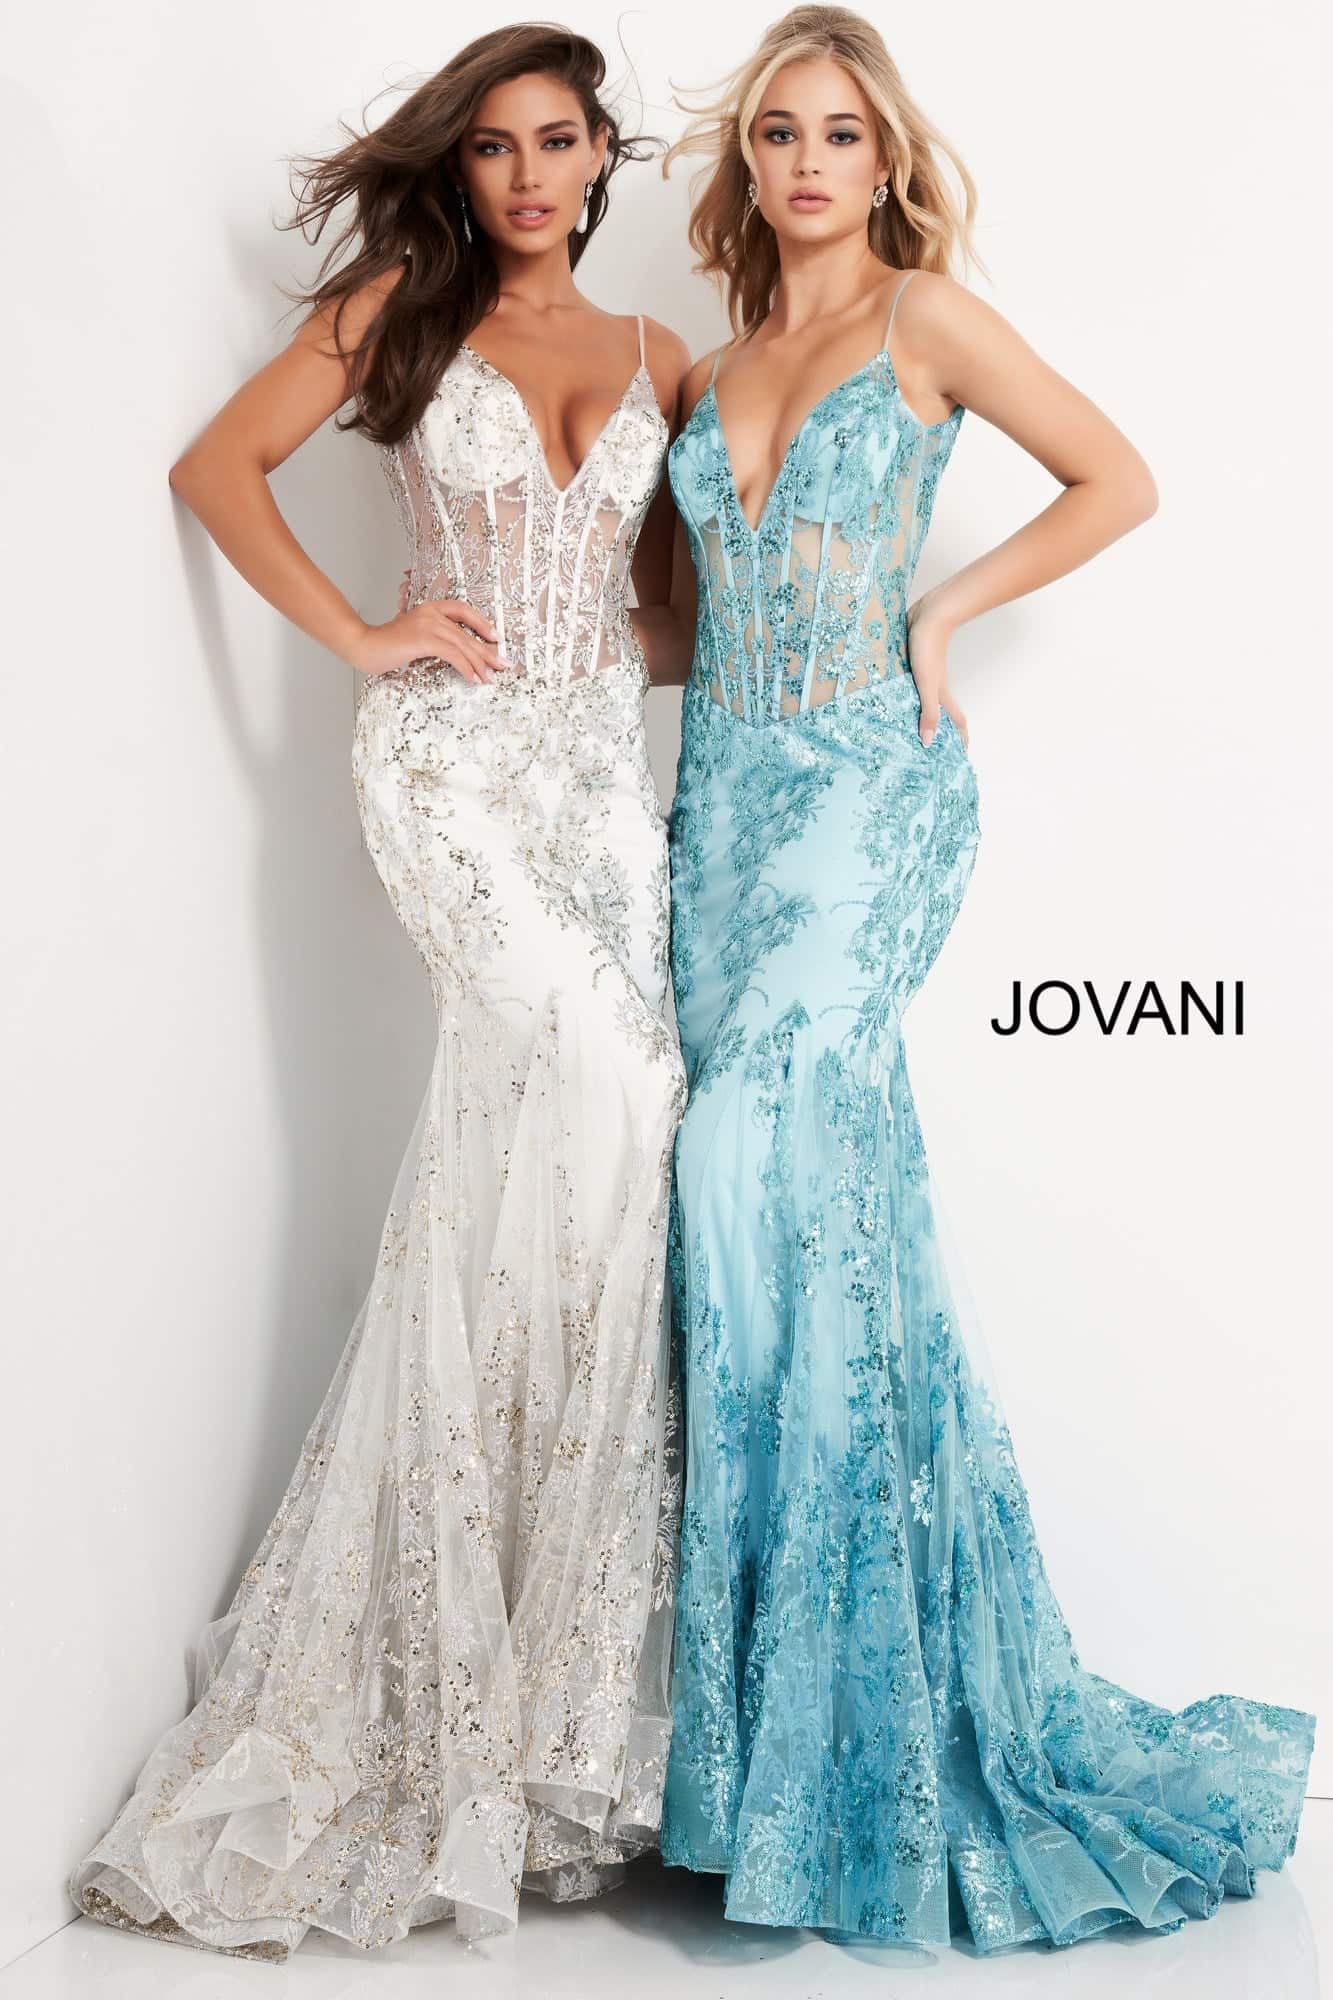 Jovani - 3675 Sequined Illusion Corset Mermaid Gown Pageant Dresses